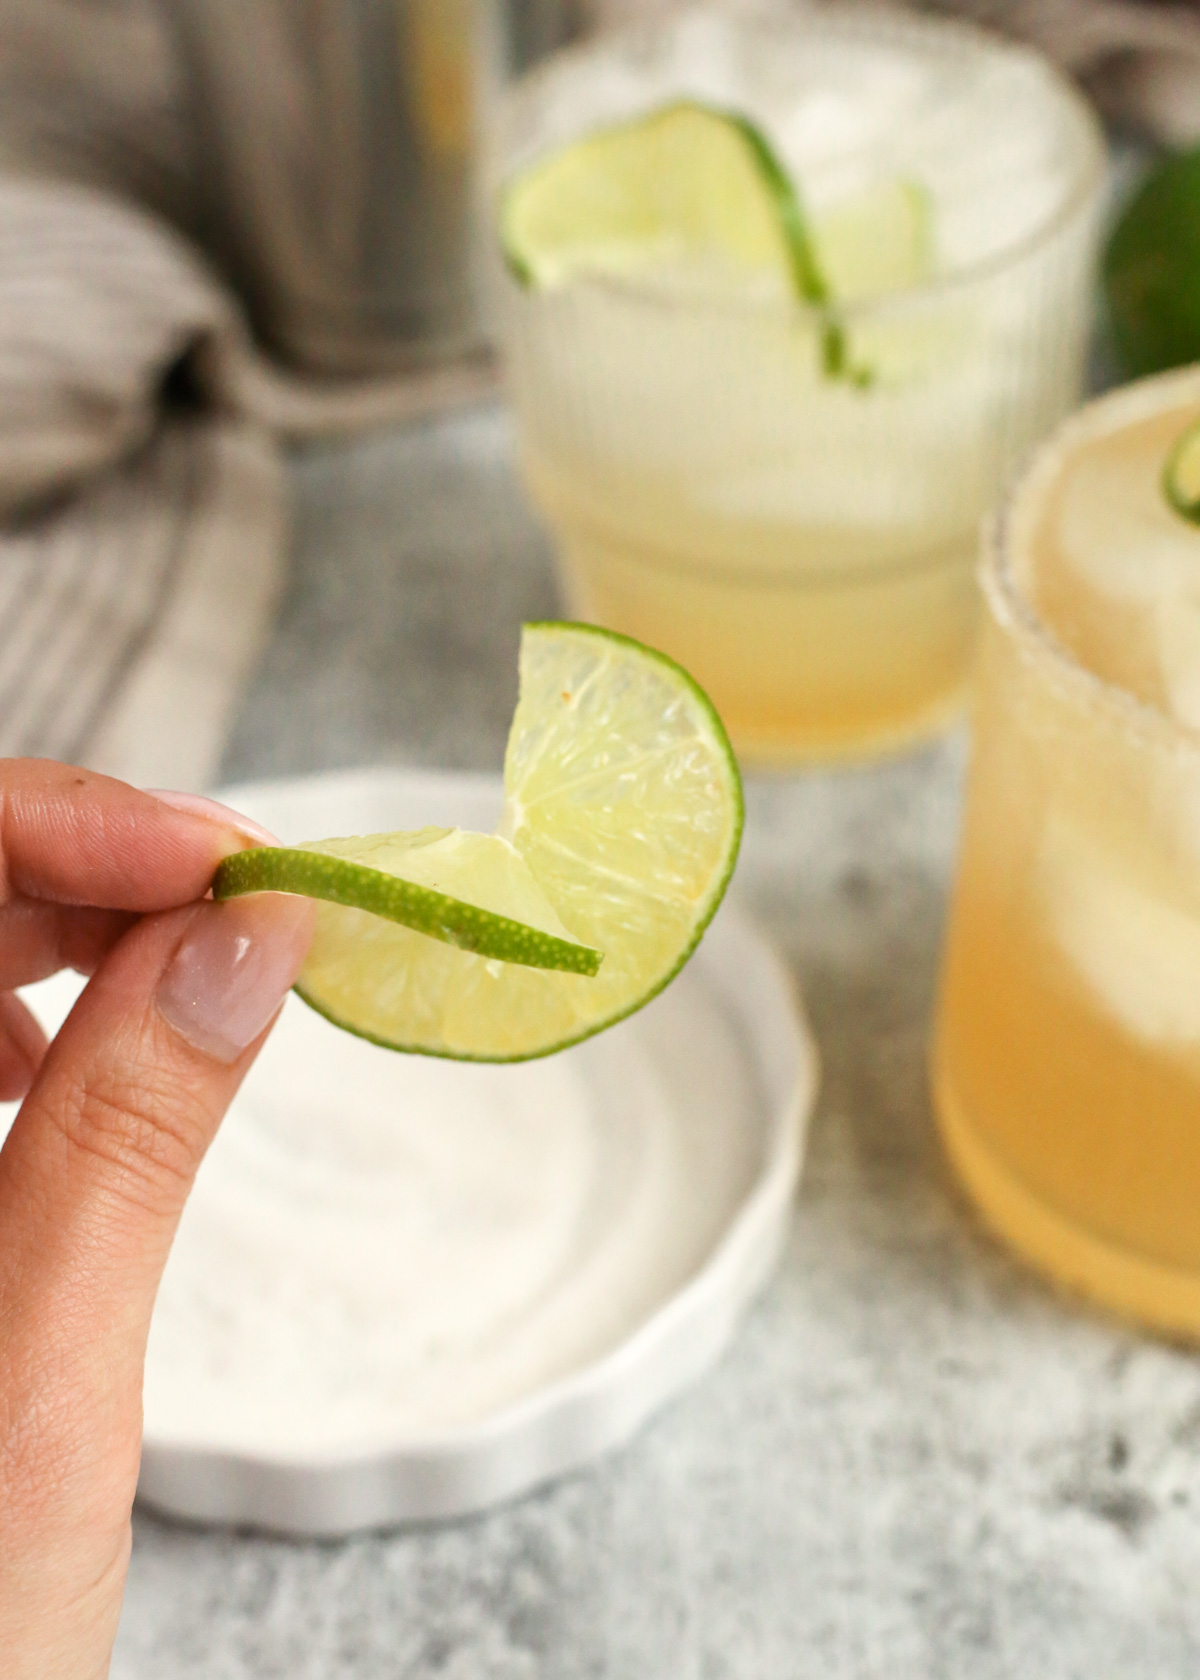 A woman's hand holds a thin slice of lime that's been cut halfway through and twisted to form a spiral shape to garnish a yuzu margarita